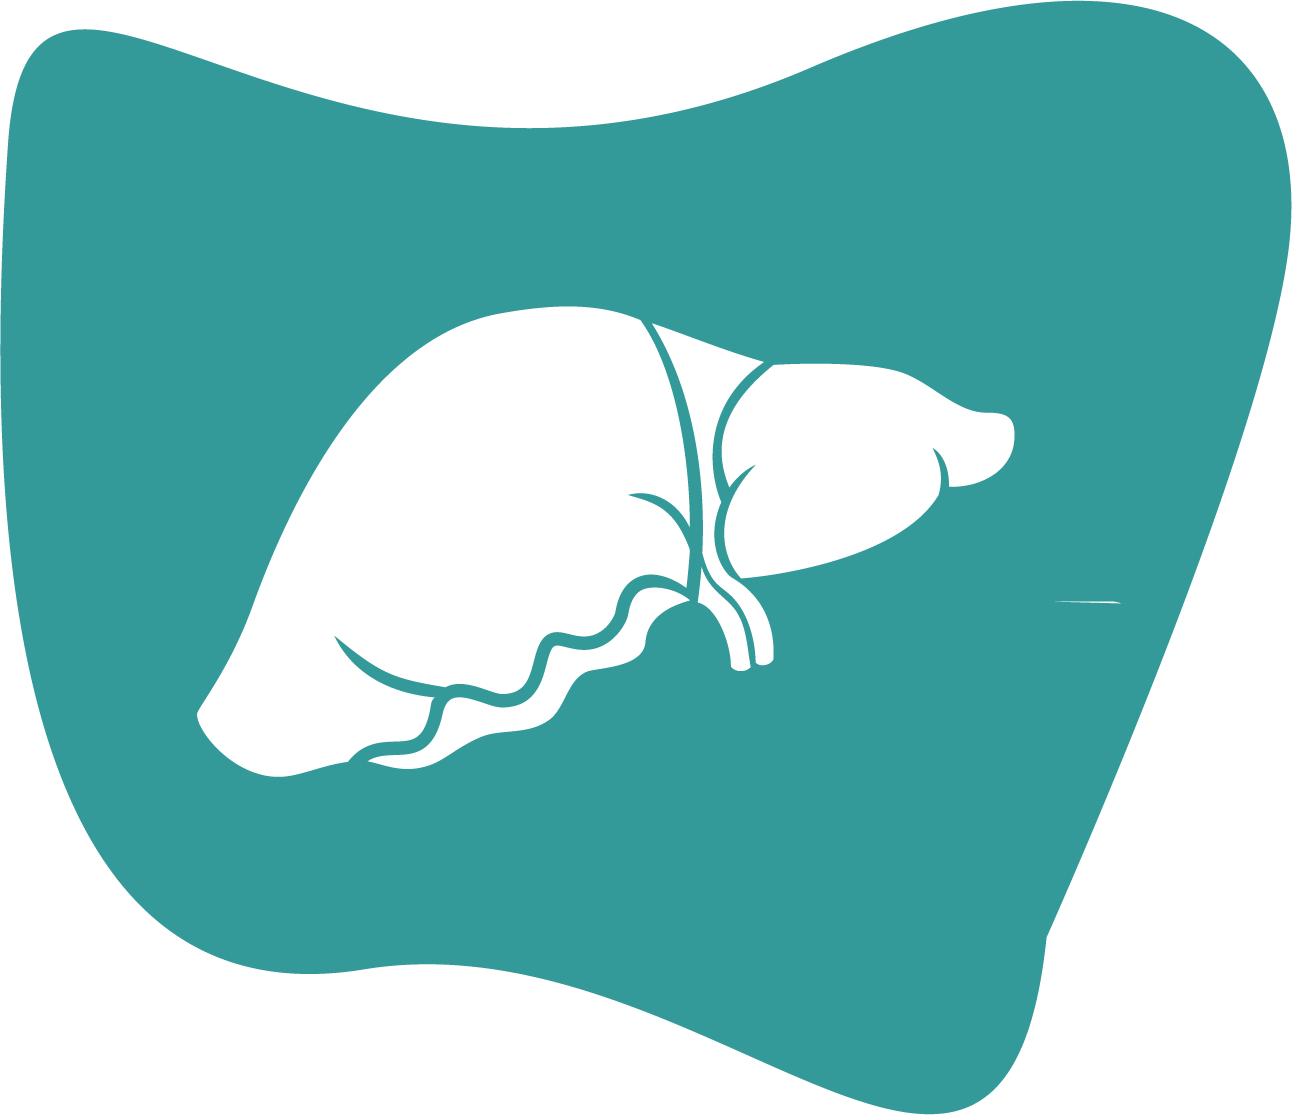 liver model icon 2.png__PID:80eed11a-2847-4254-bd4b-4e66b8daf731